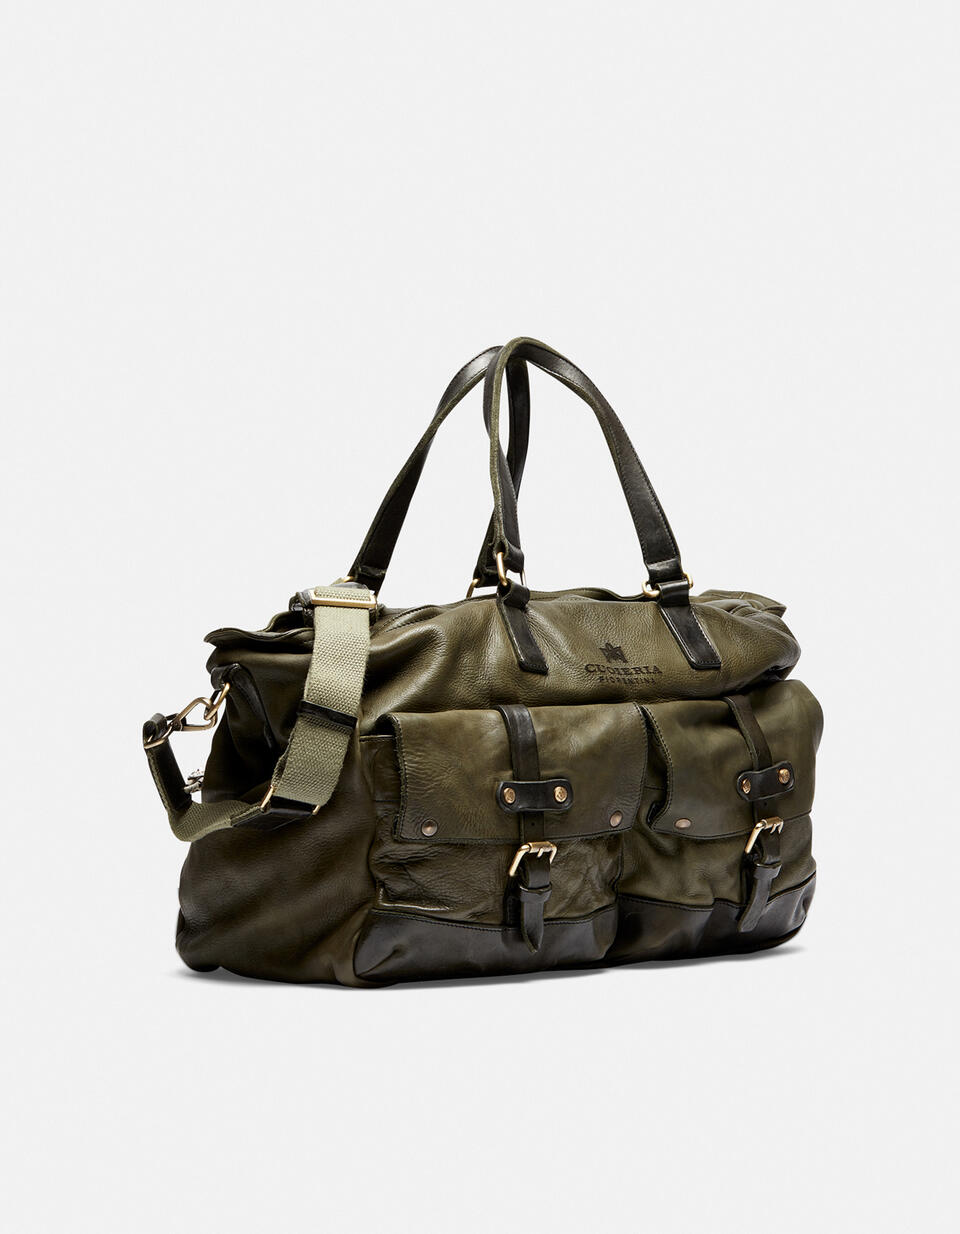 Millennial weekender bag - Luggage | TRAVEL BAGS  - Luggage | TRAVEL BAGSCuoieria Fiorentina